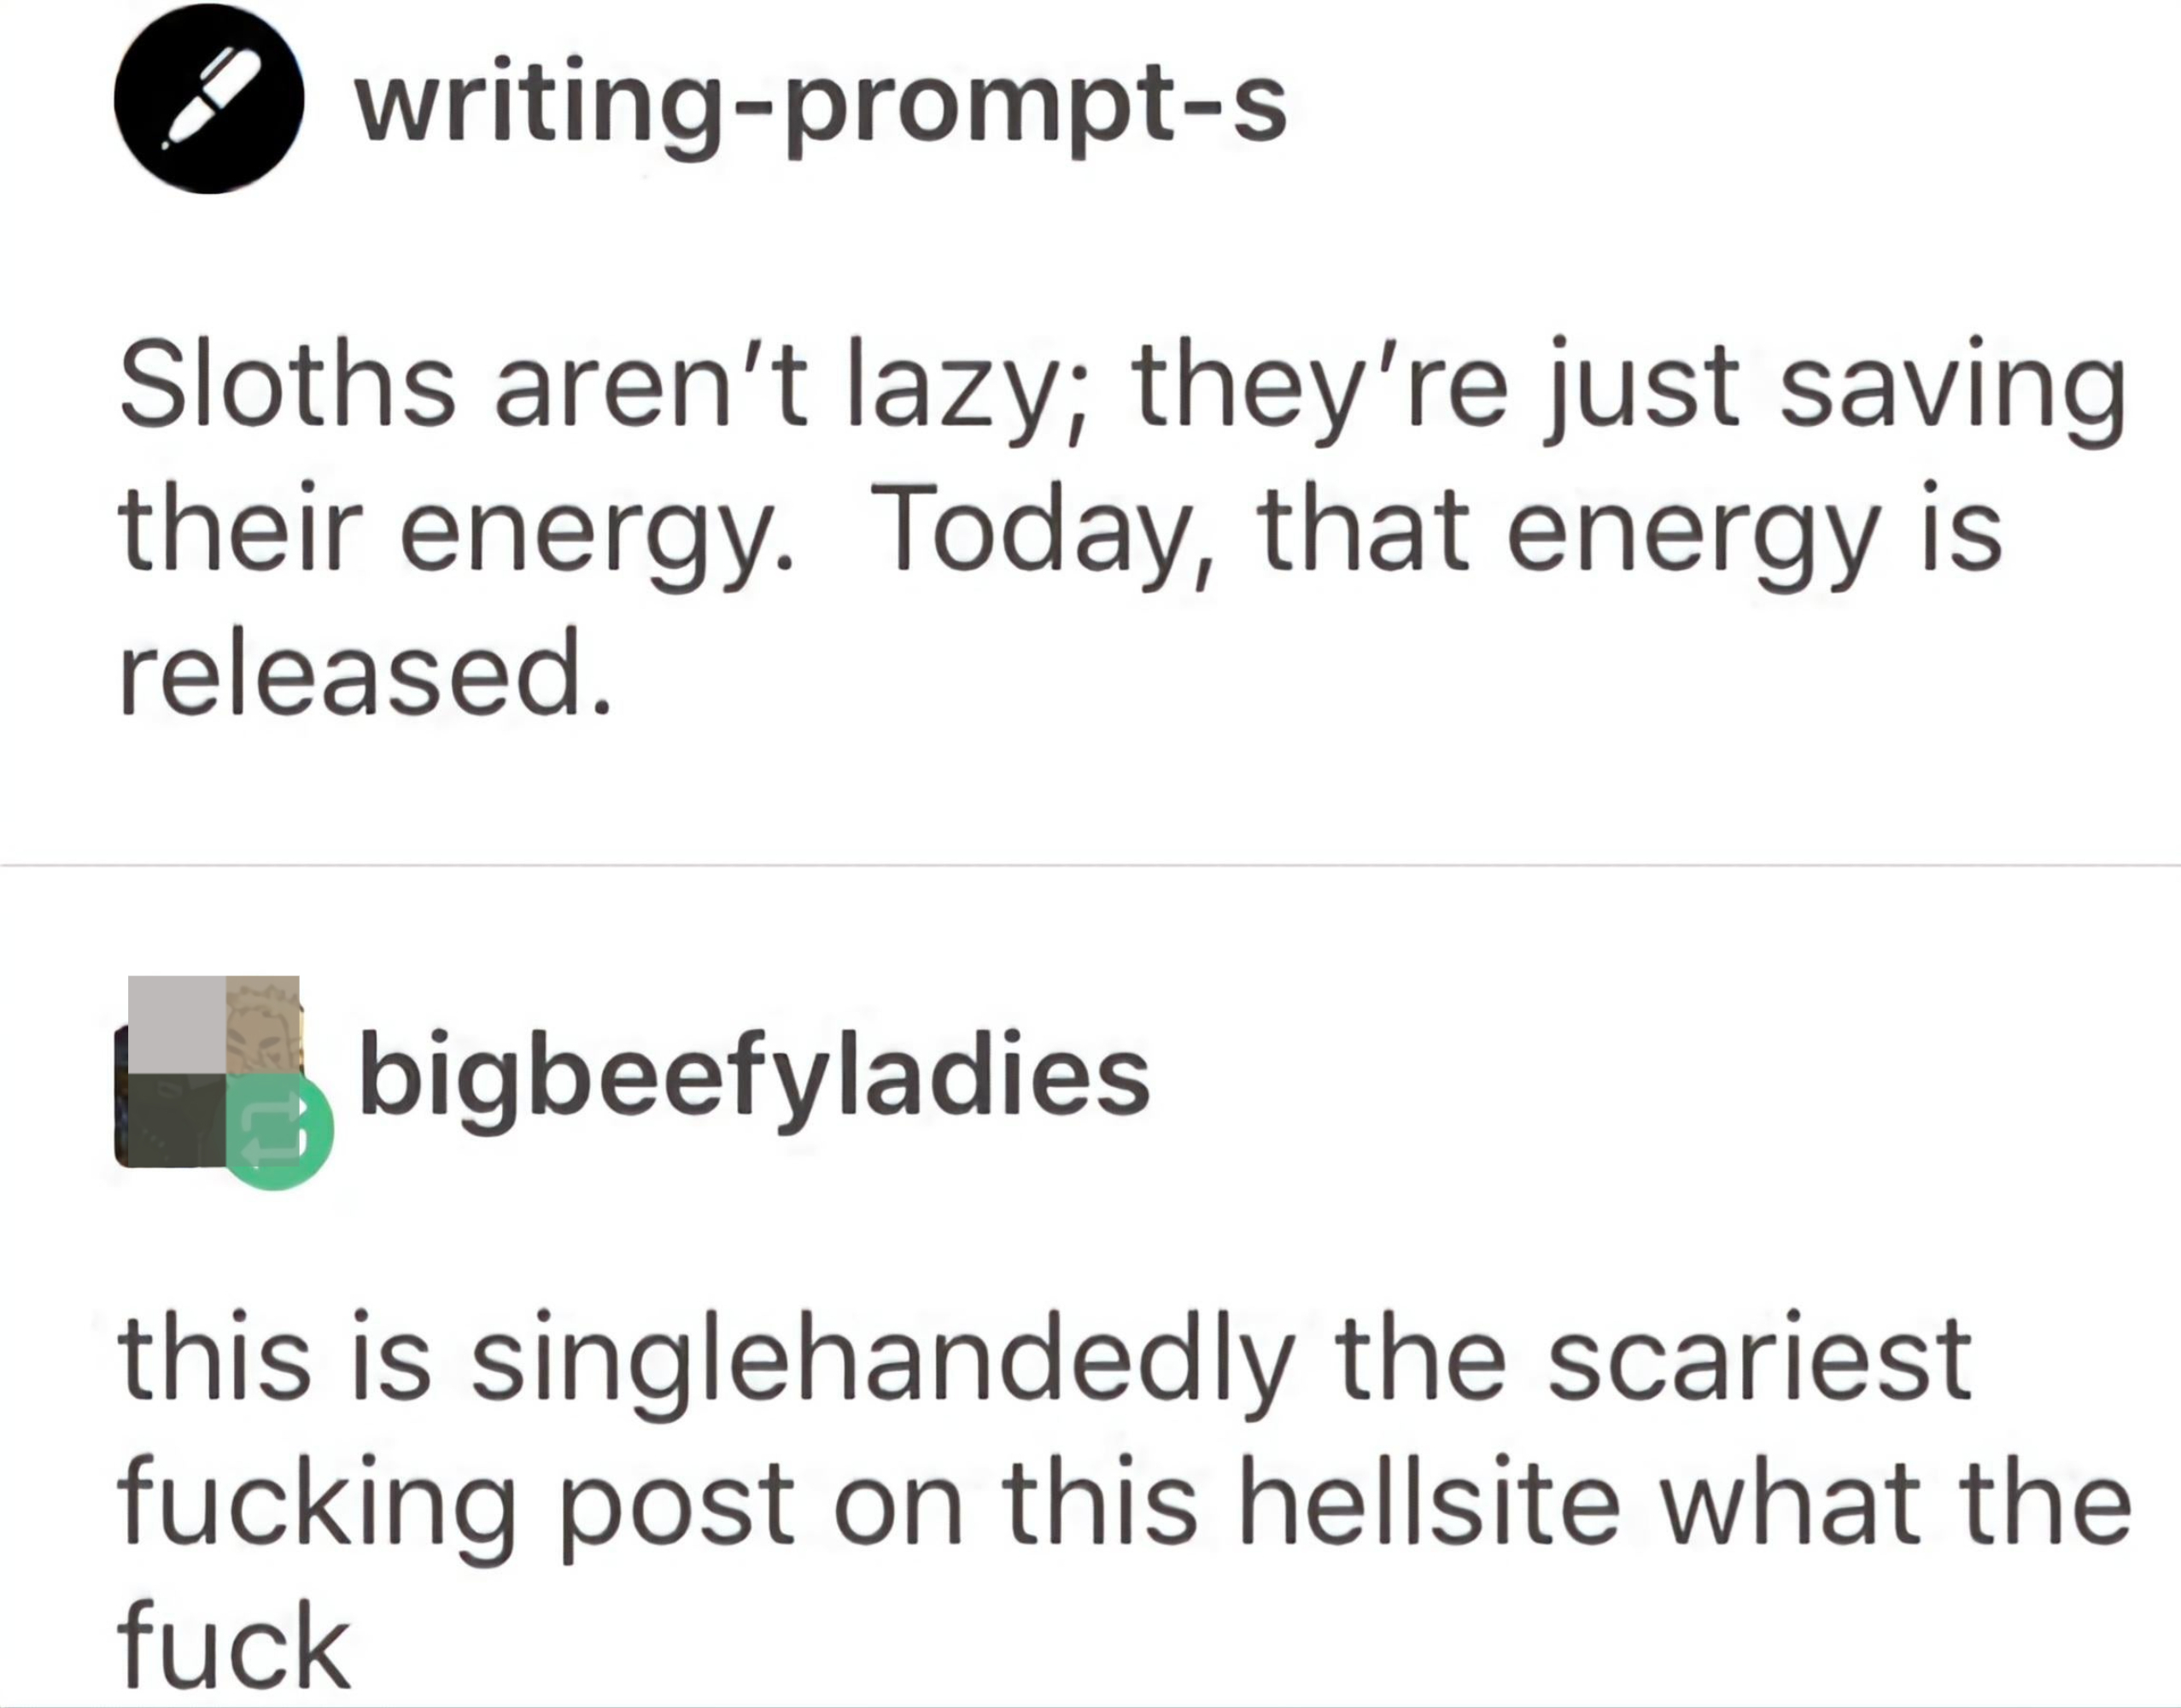 &quot;Sloths aren&#x27;t lazy; they&#x27;re just saving their energy; today that energy is released&quot;; response: &quot;this is singlehandedly the scariest fucking post on this hellsite what the fuck&quot;